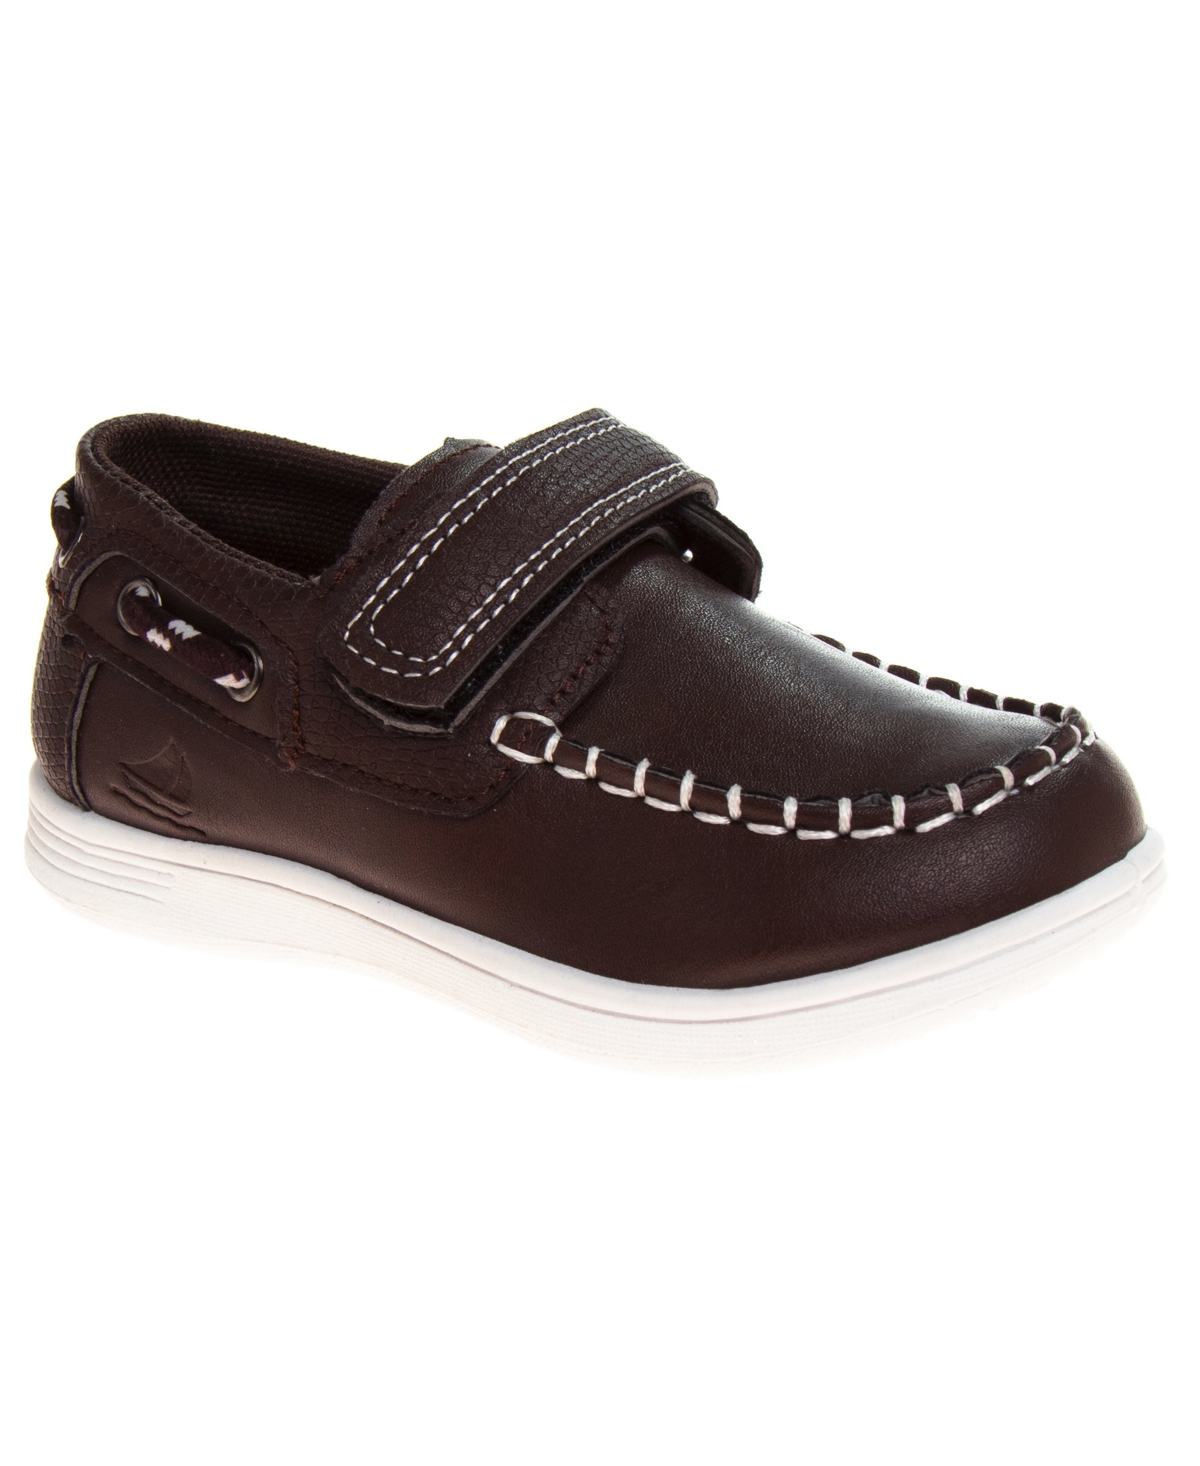 Shop Sail Big Boys Ship Boat Lightweight Shoes In Brown